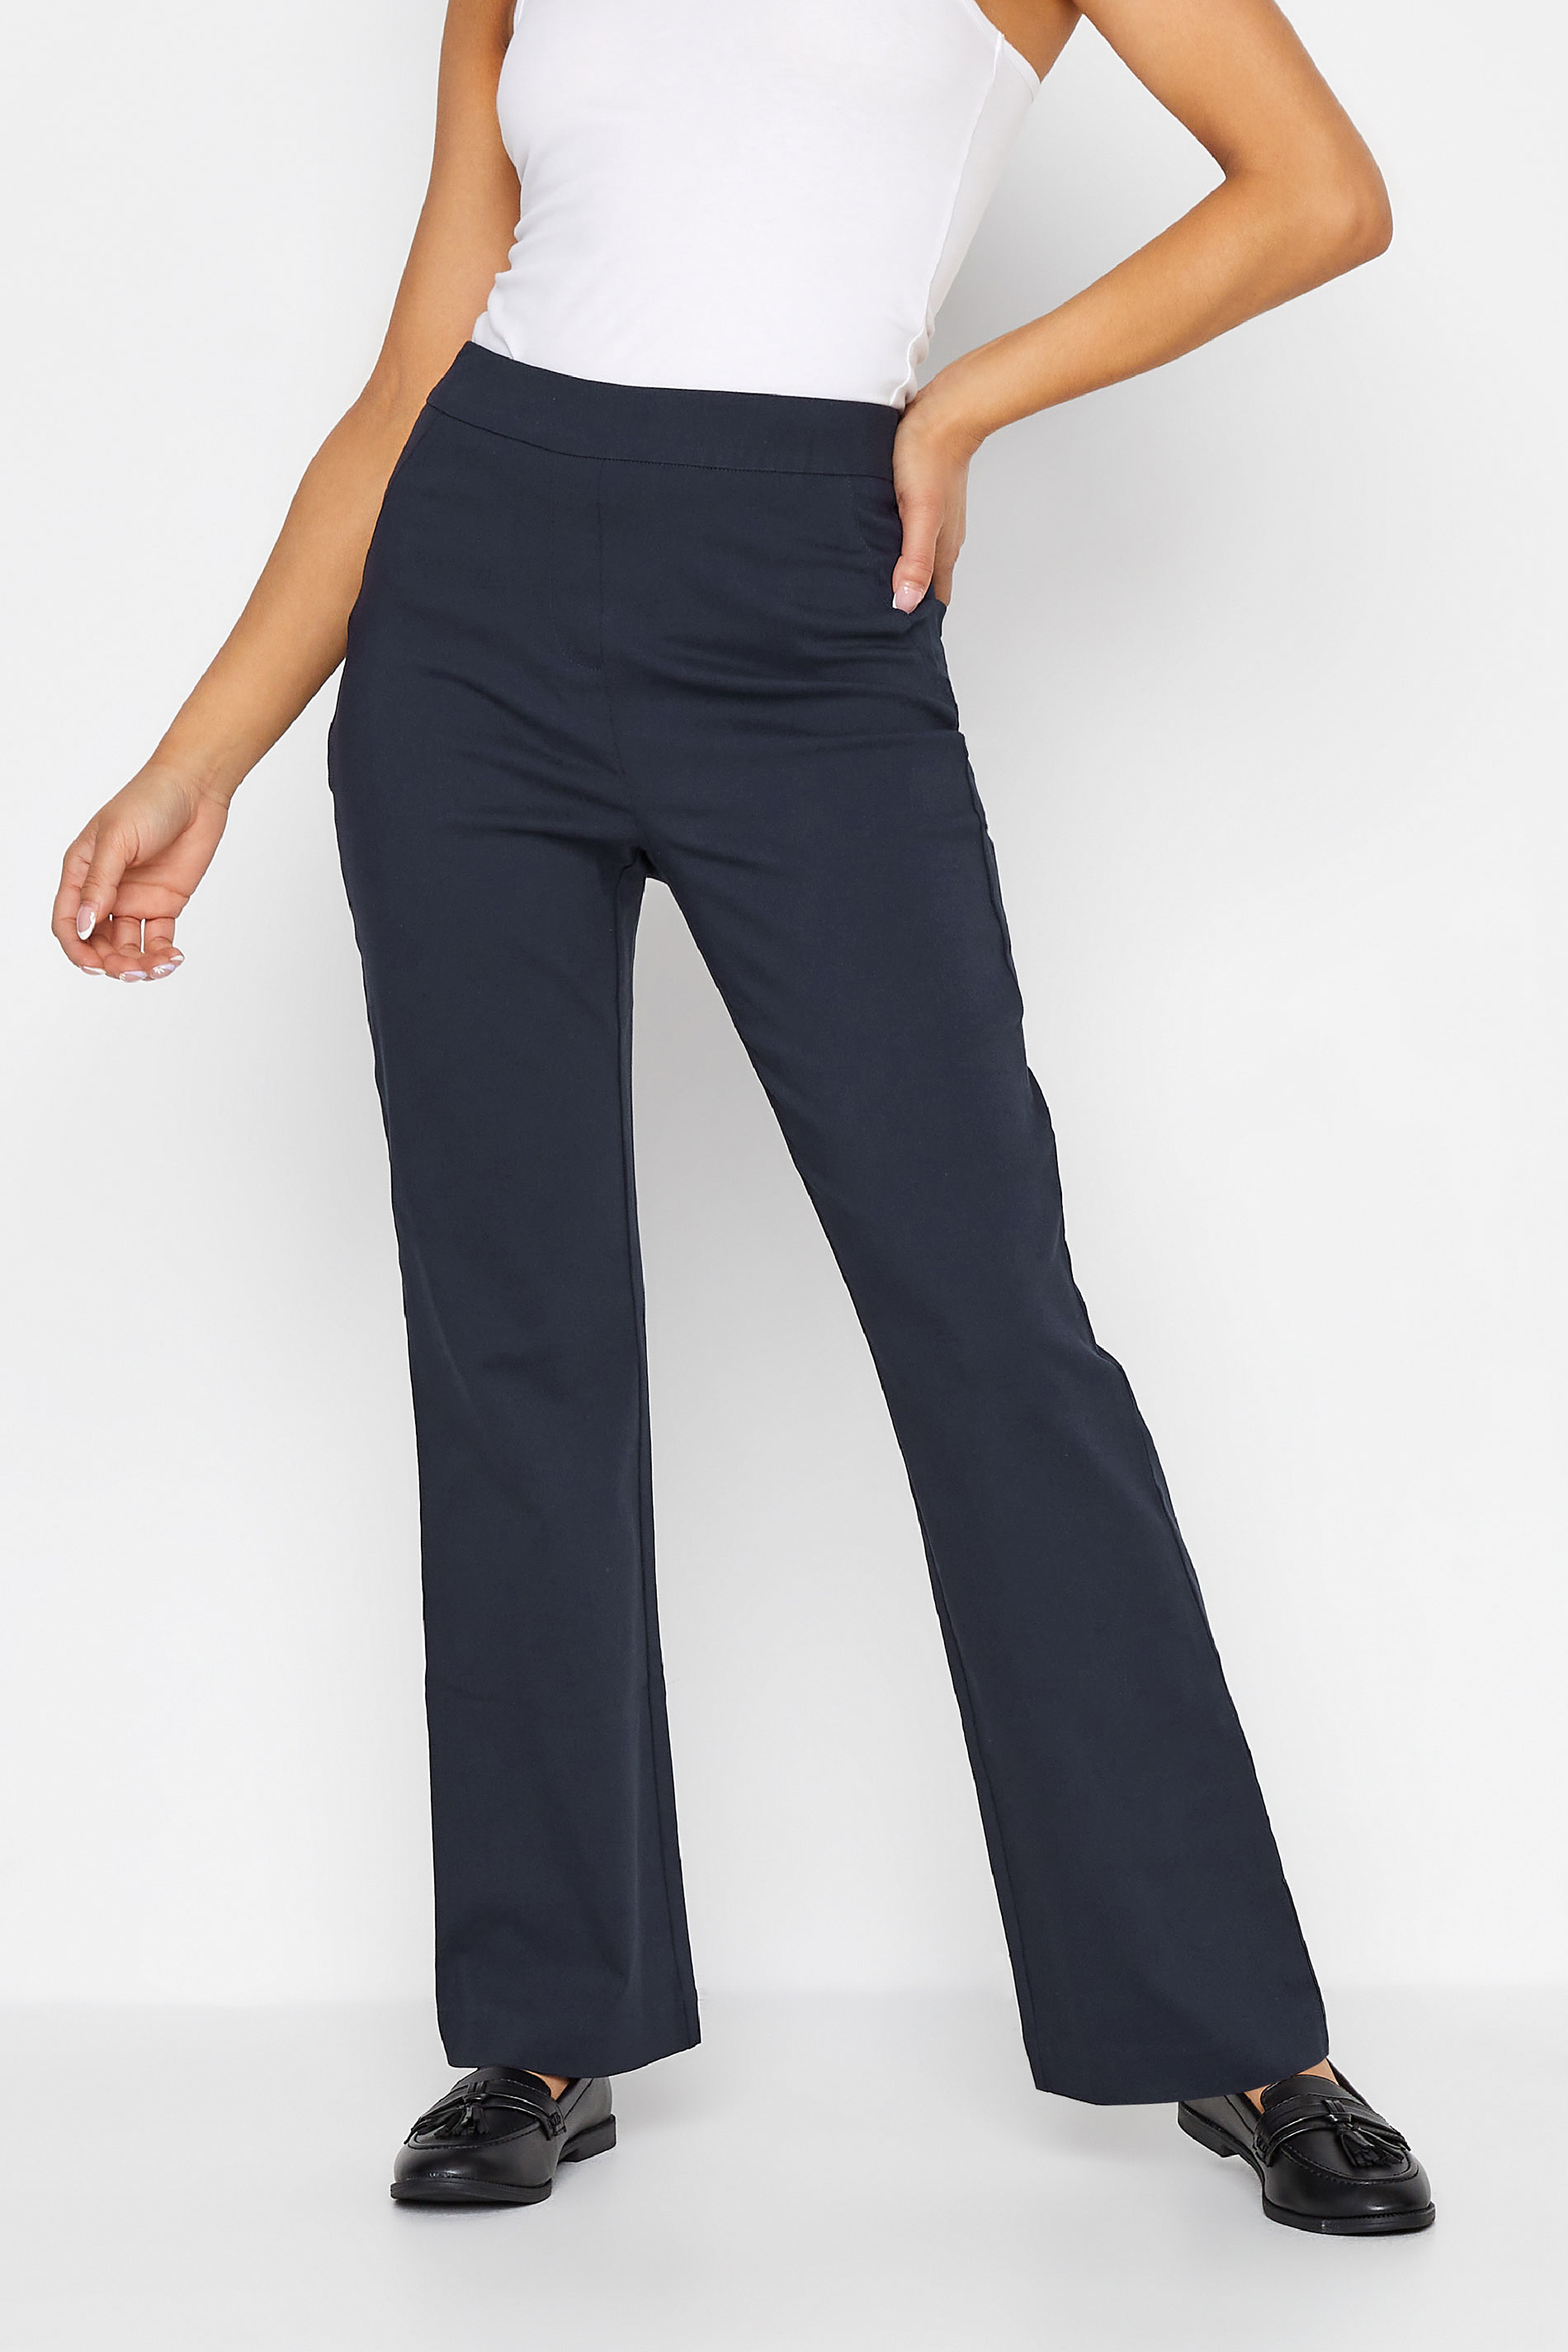 Petite Navy Blue Stretch Bengaline Bootcut Trousers 1